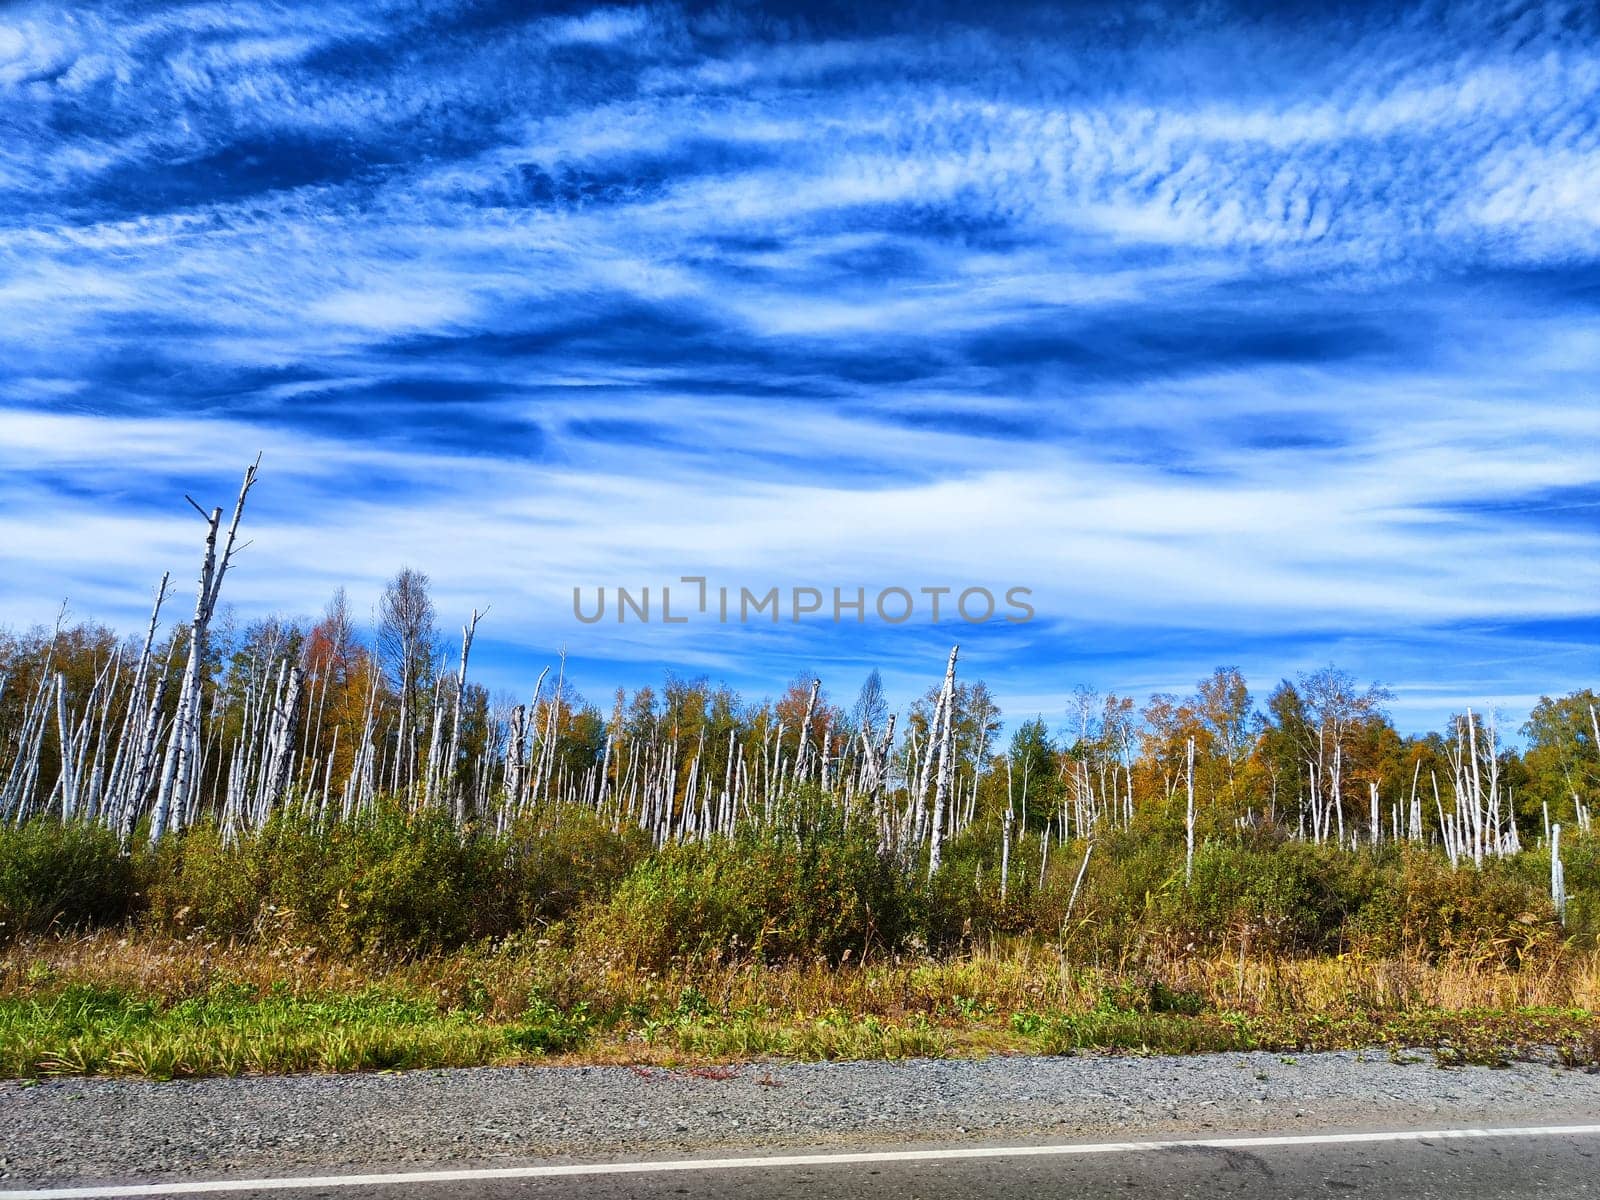 The view from the car window at the trunks of dead birches on the side of the road and the blue sky with white clouds. Trees that died due to poor ecology and swamps. Views and travel experiences by keleny